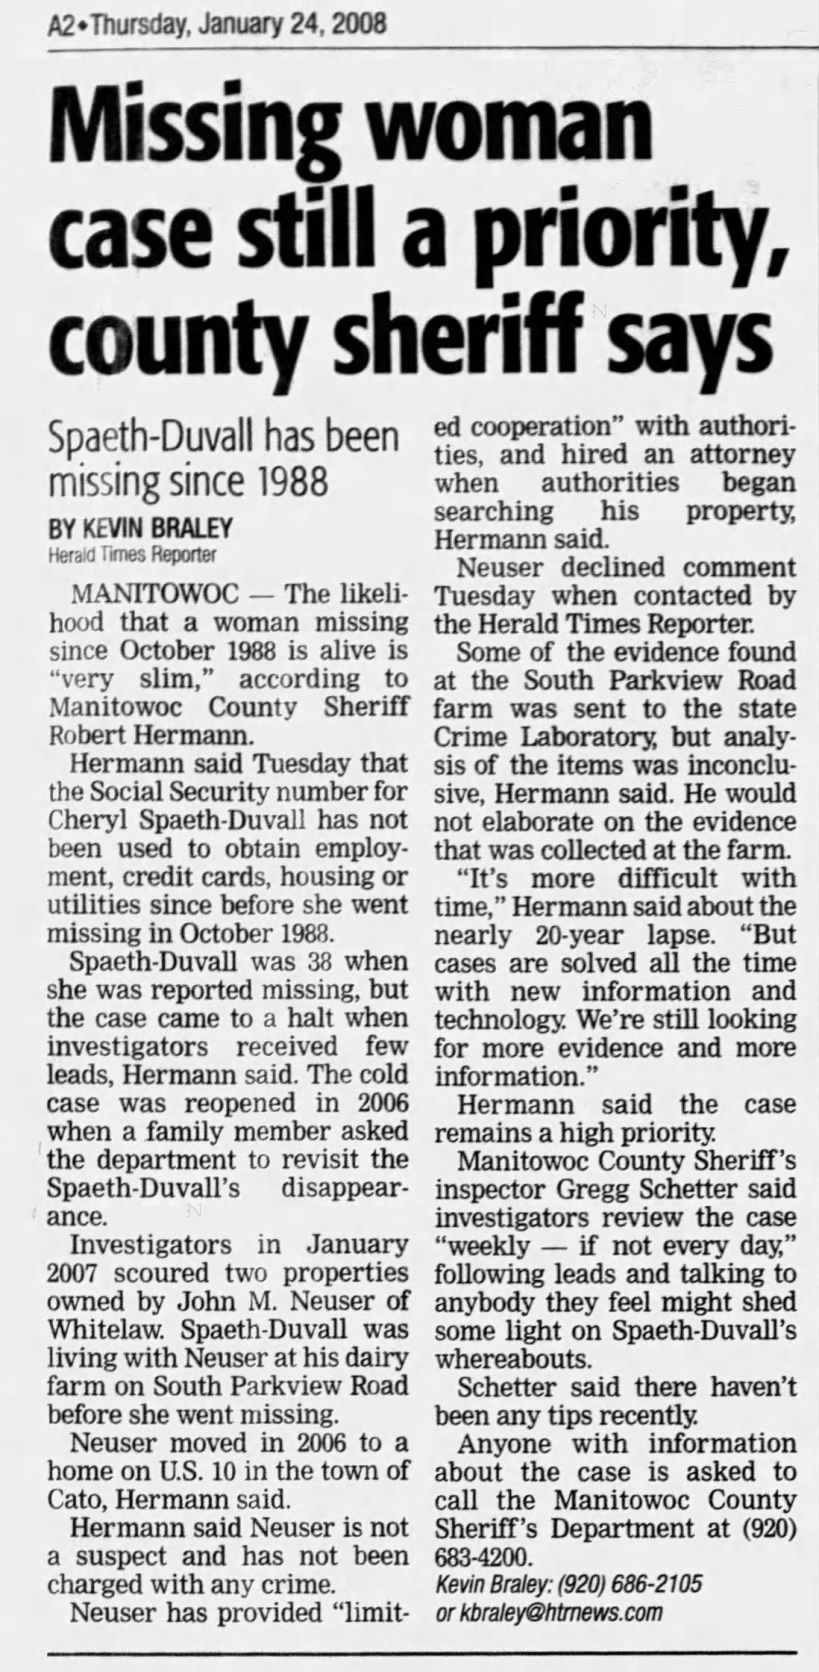 24 Jan 2008 Missing woman case still a priority, county sheriff says